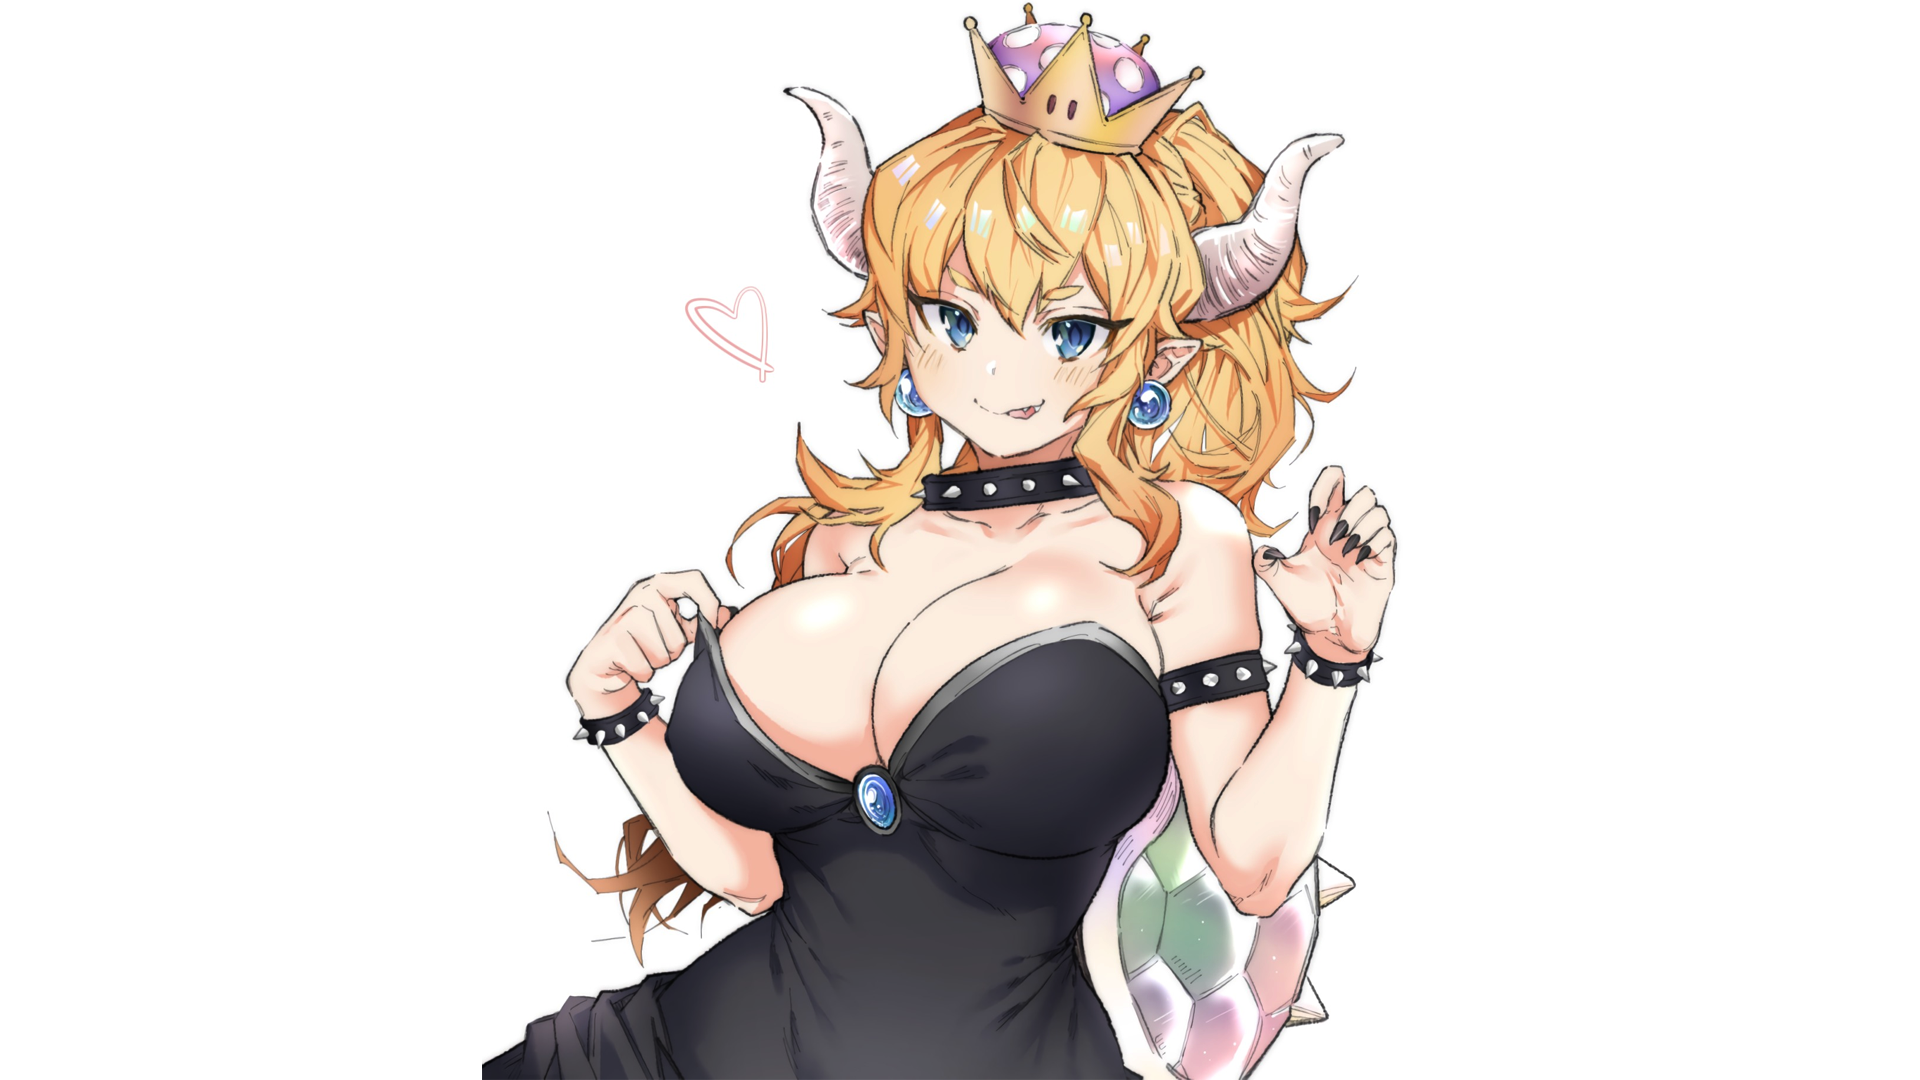 Anime 1920x1080 anime video game art anime girls simple background minimalism Super Mario Bowsette Bowser big boobs boobs